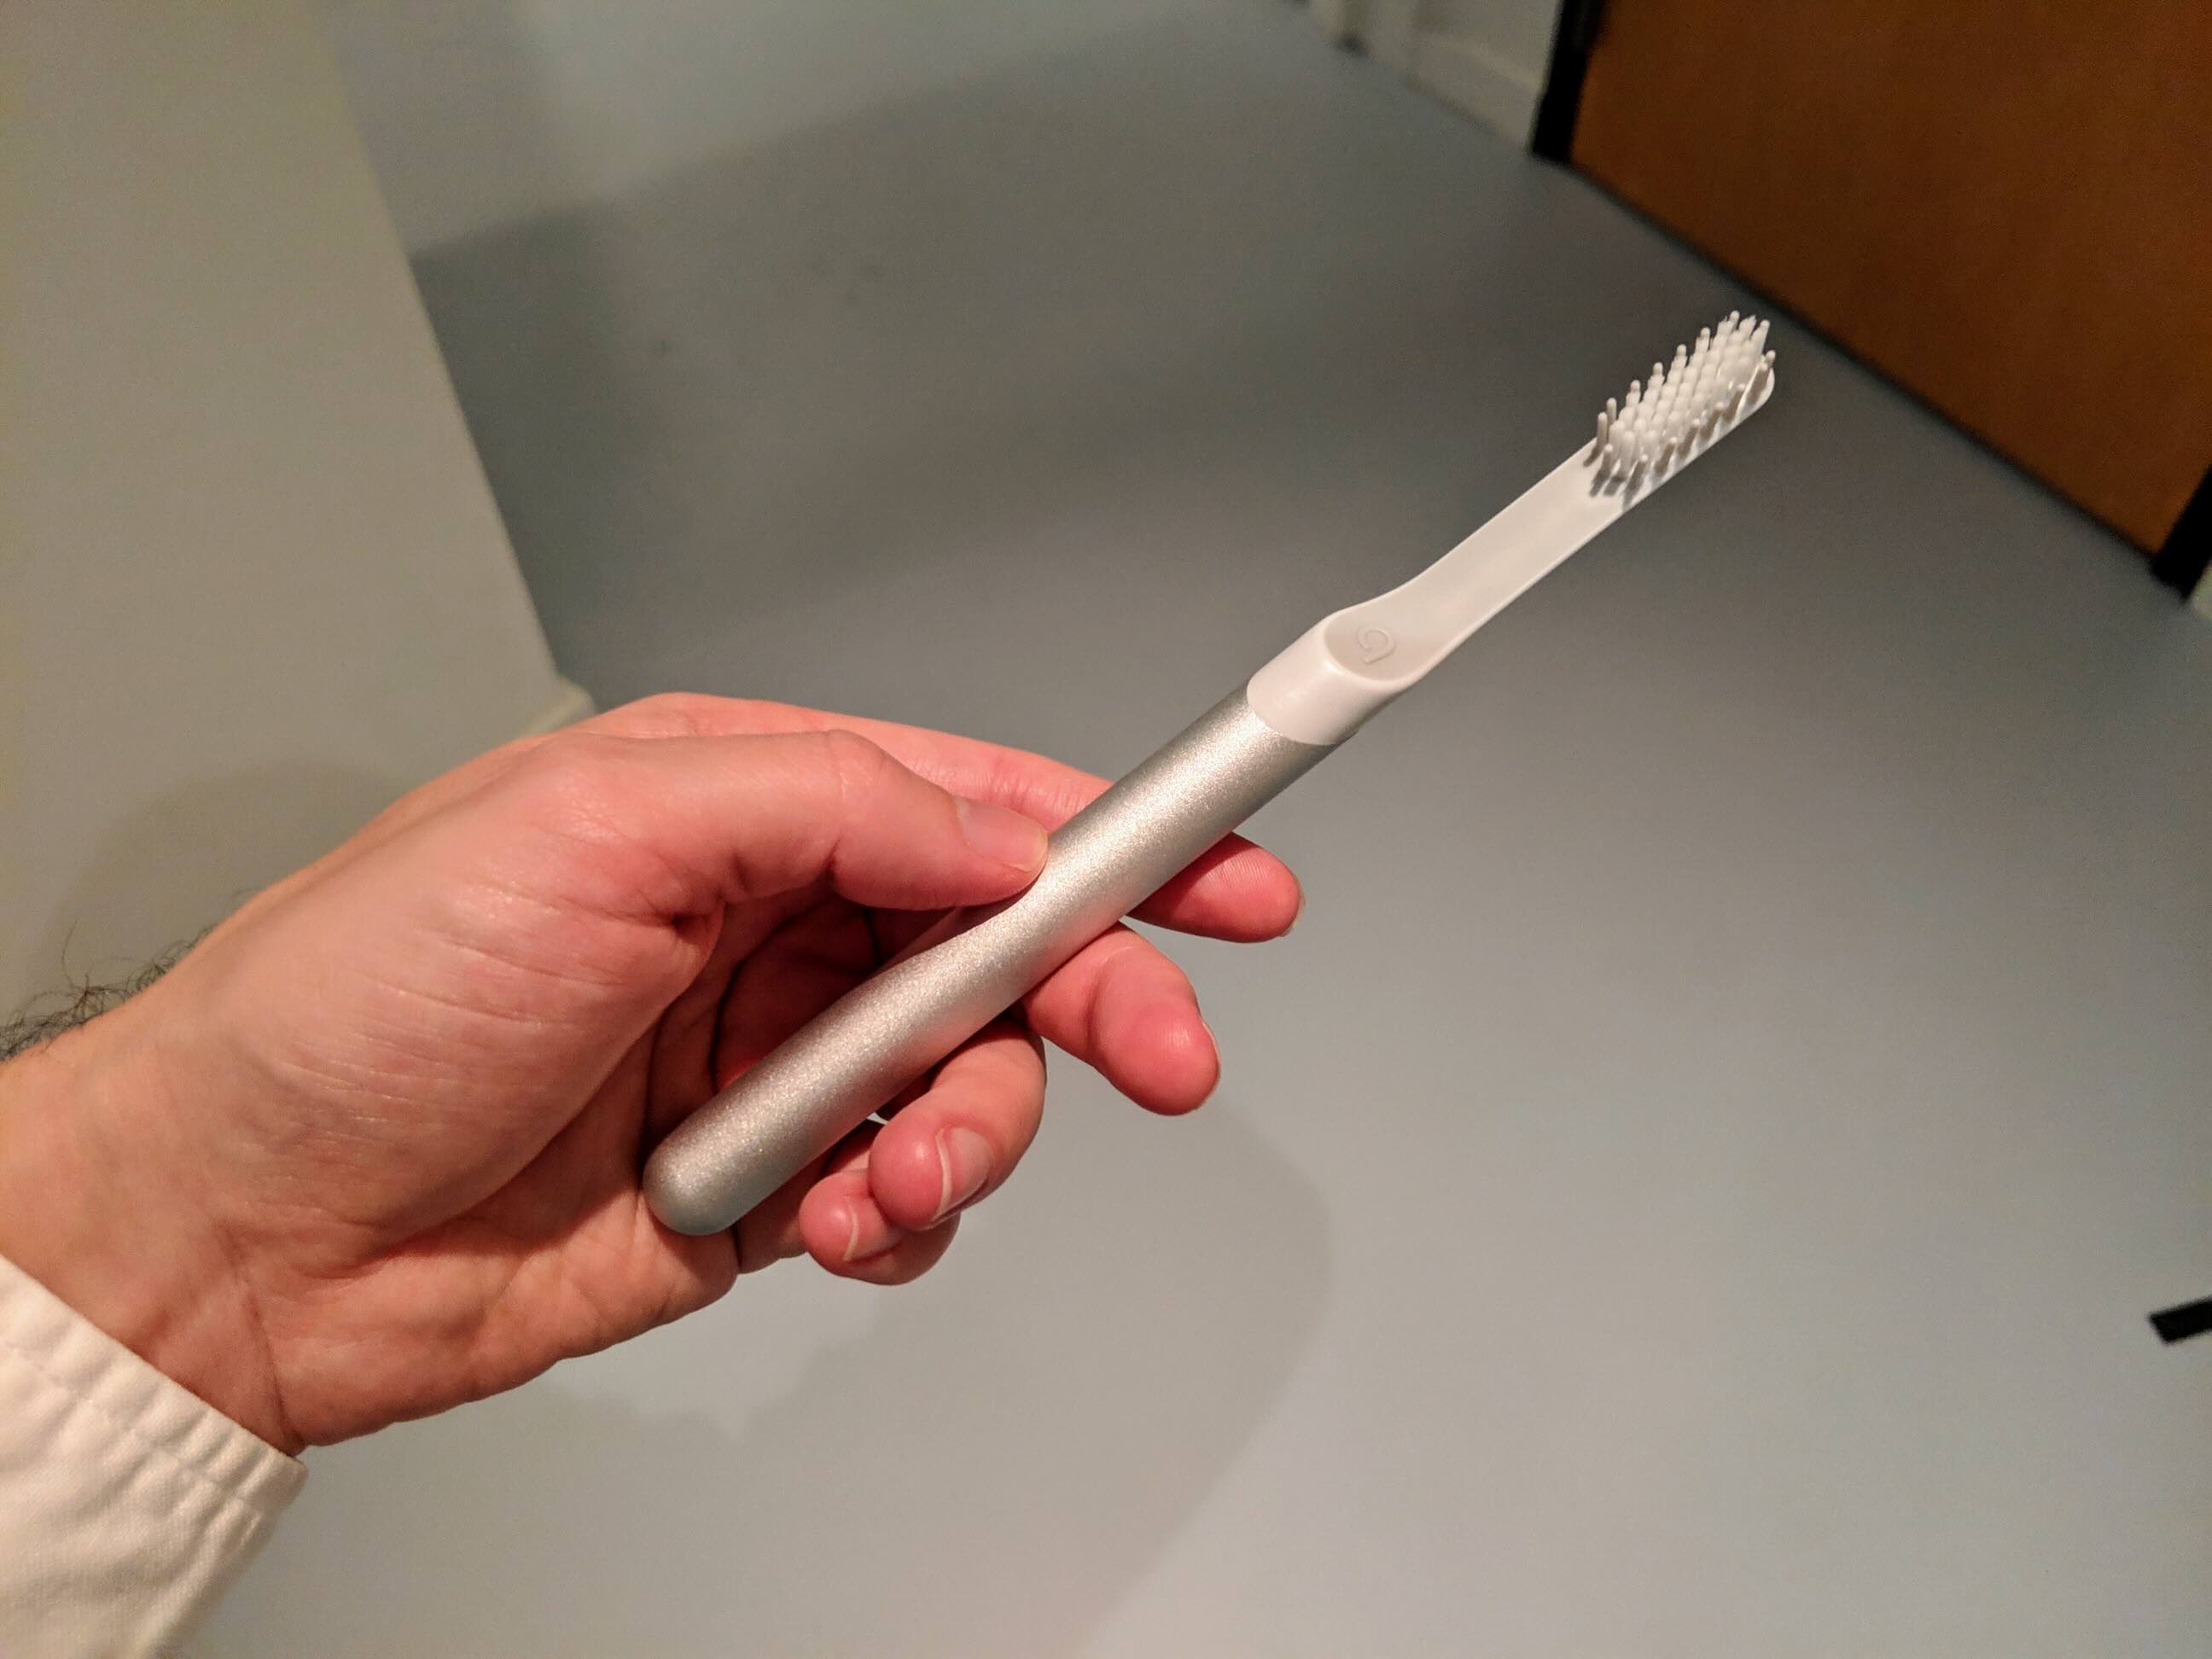 How To Charge A Quip Toothbrush